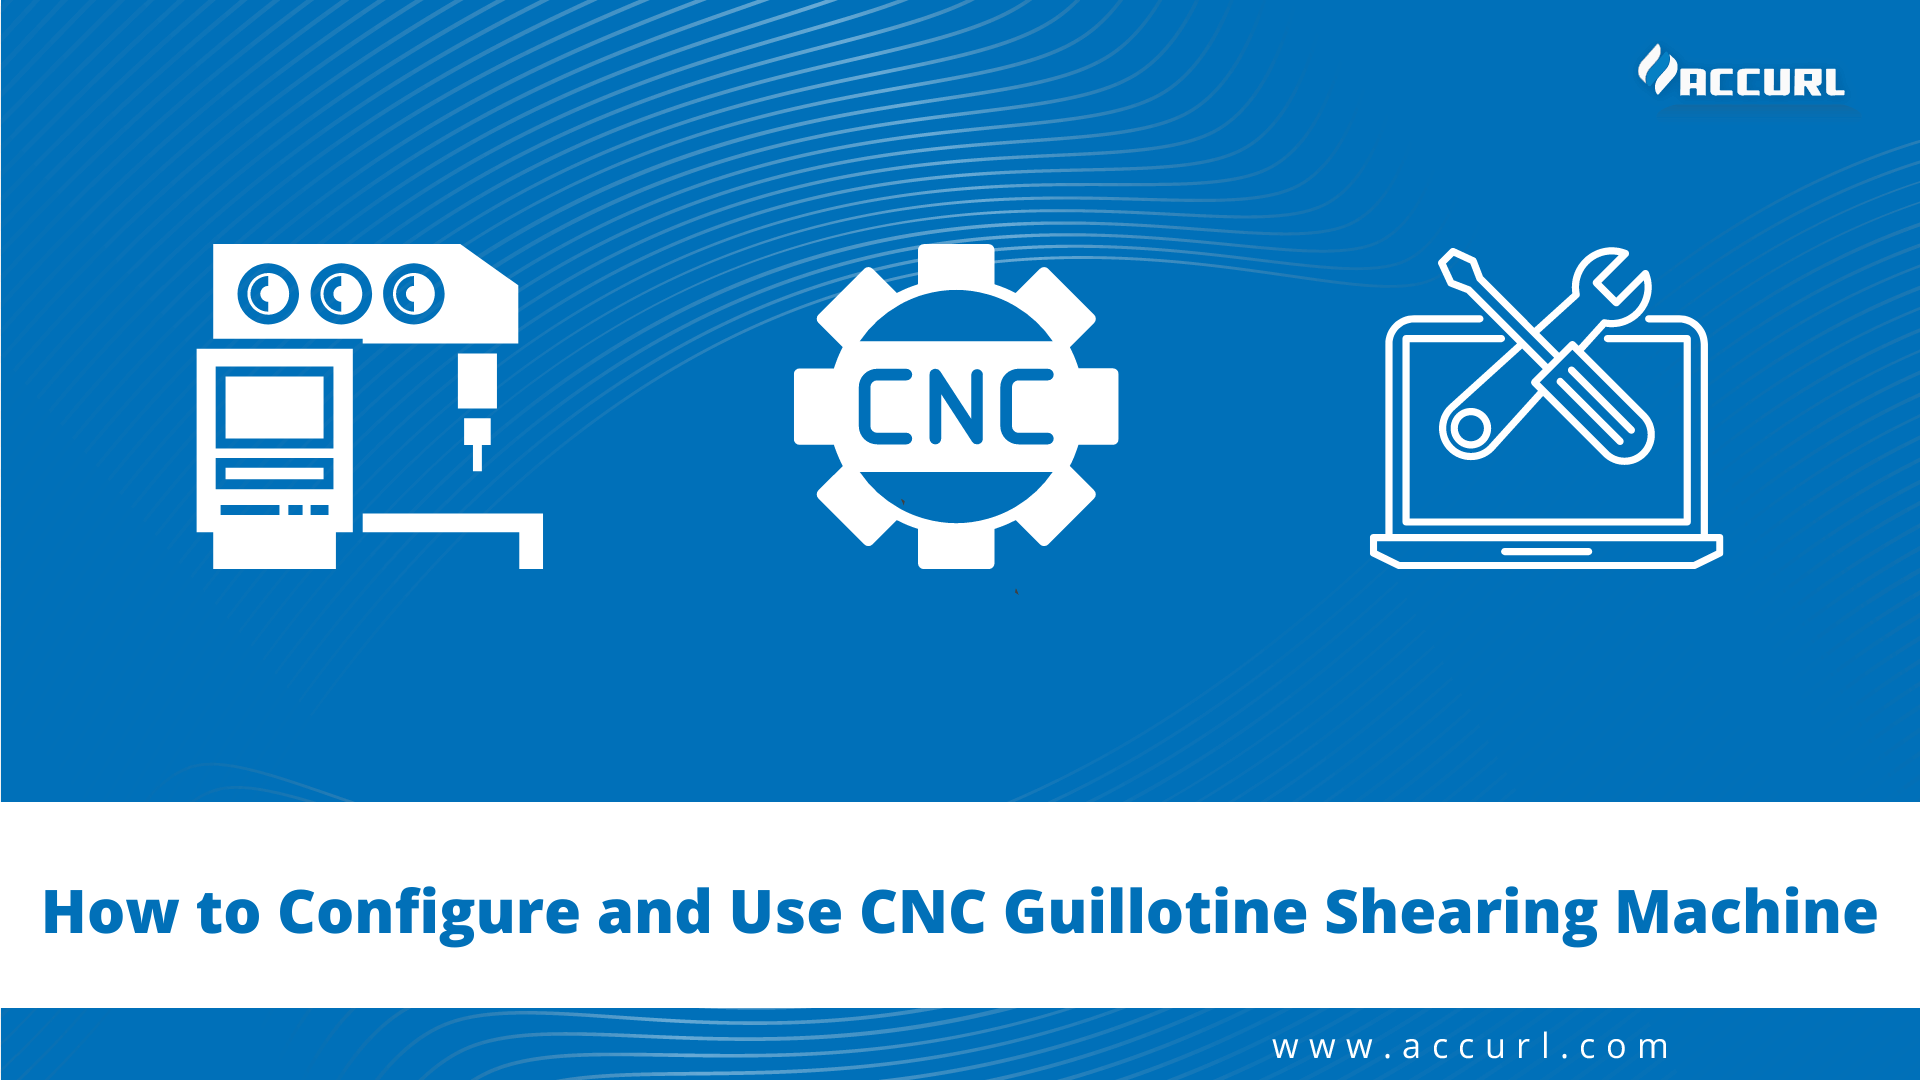 How to Configure and Use CNC Guillotine Shearing Machine